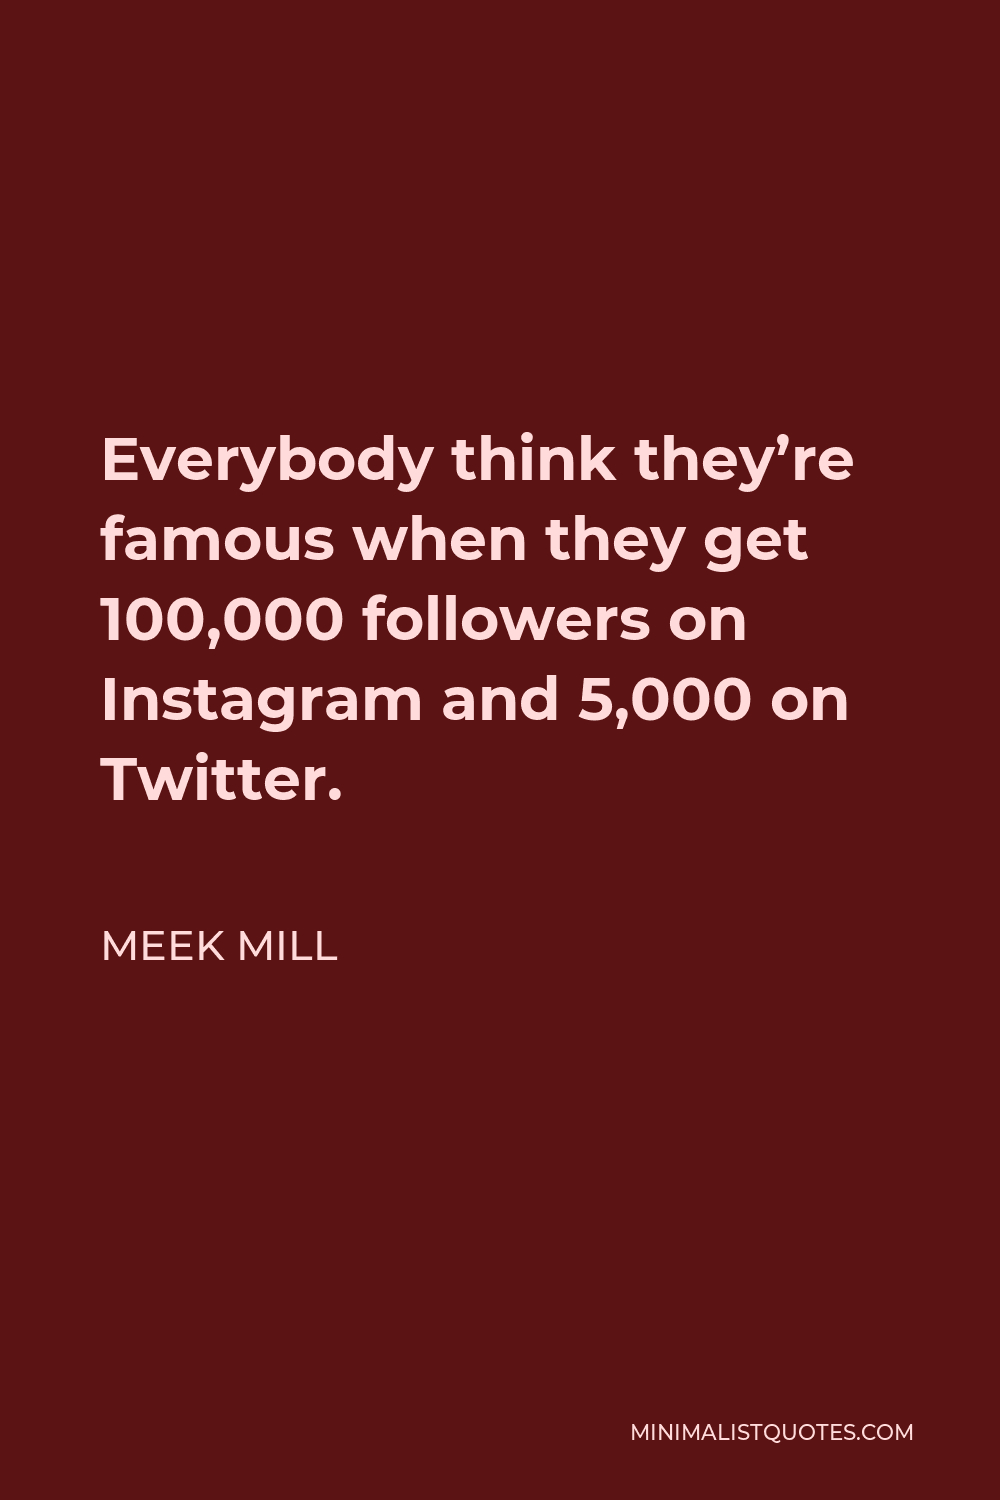 Meek Mill Quote - Everybody think they’re famous when they get 100,000 followers on Instagram and 5,000 on Twitter.